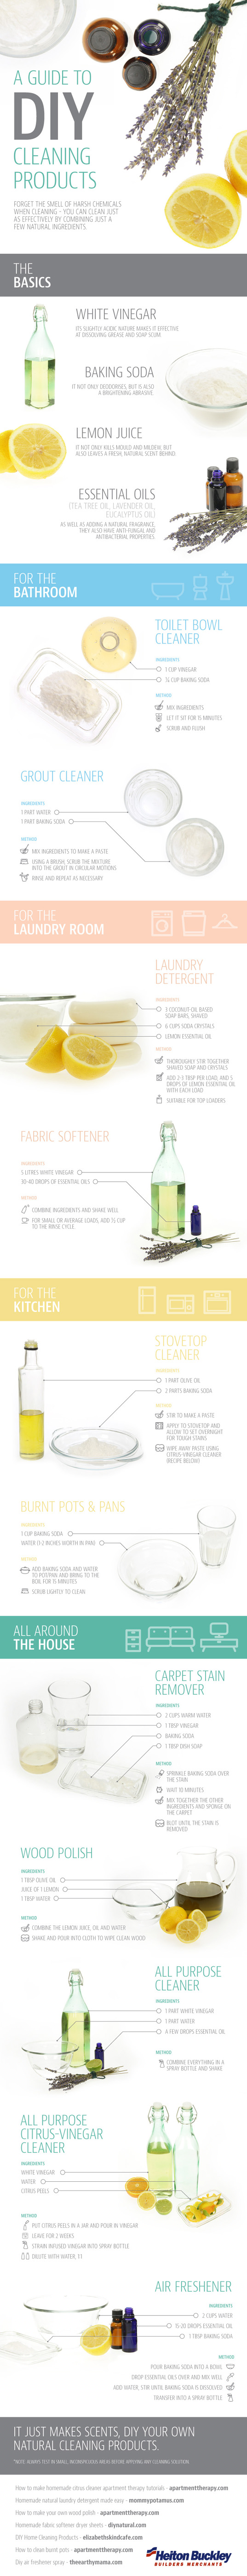 infographic a guide to natural cleaning diy products